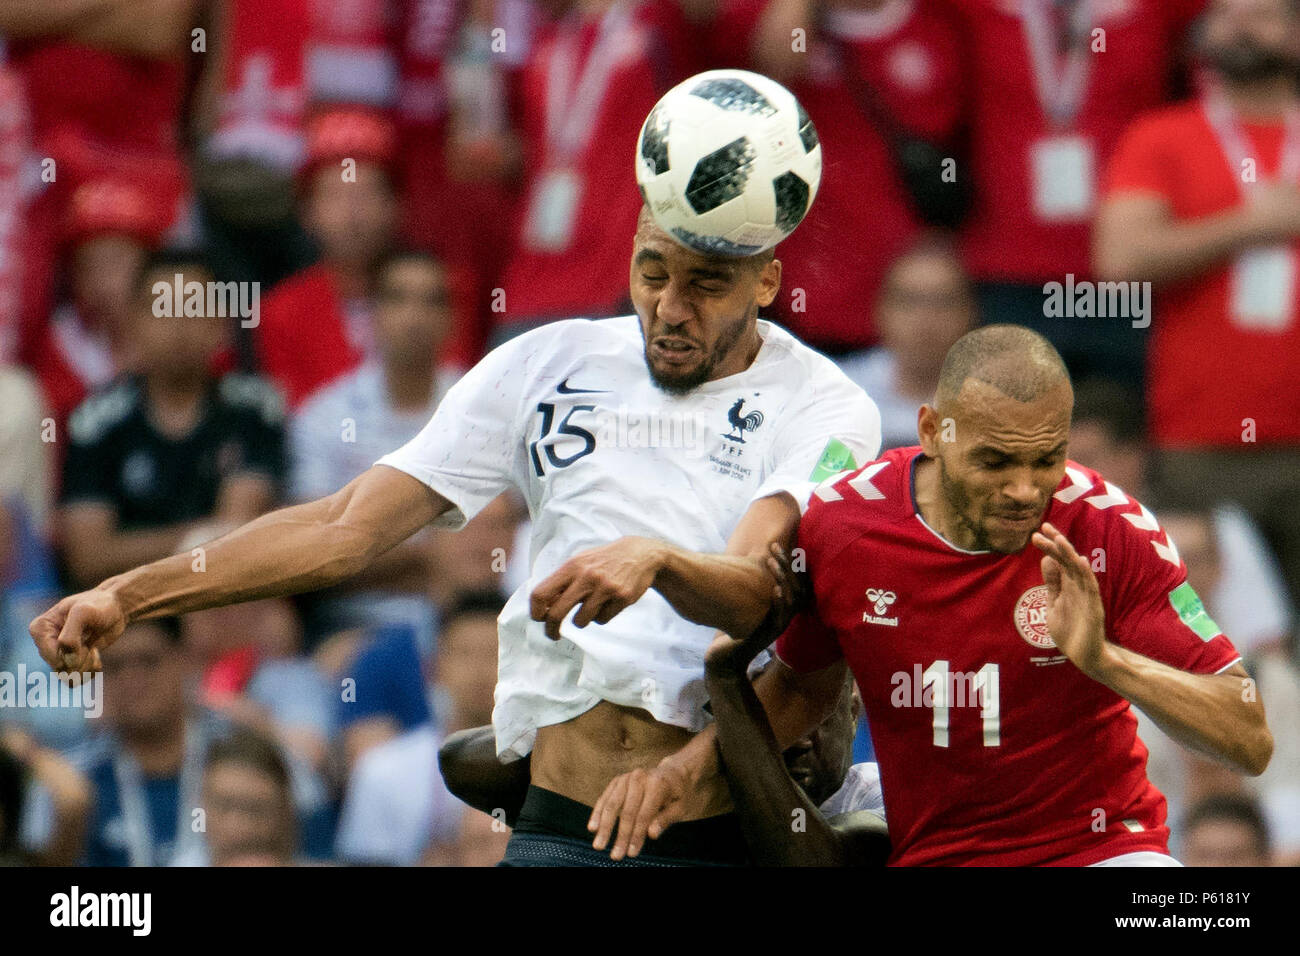 26 June 2018, Russia, Moscow, Soccer, FIFA World Cup 2018, Group C, Matchday 3 of 3 at Luzshniki Stadium: Martin Braithwaite (L) from Denmark and Steven N'Zonzi (R) from France in action. Photo: Federico Gambarini/dpa Stock Photo